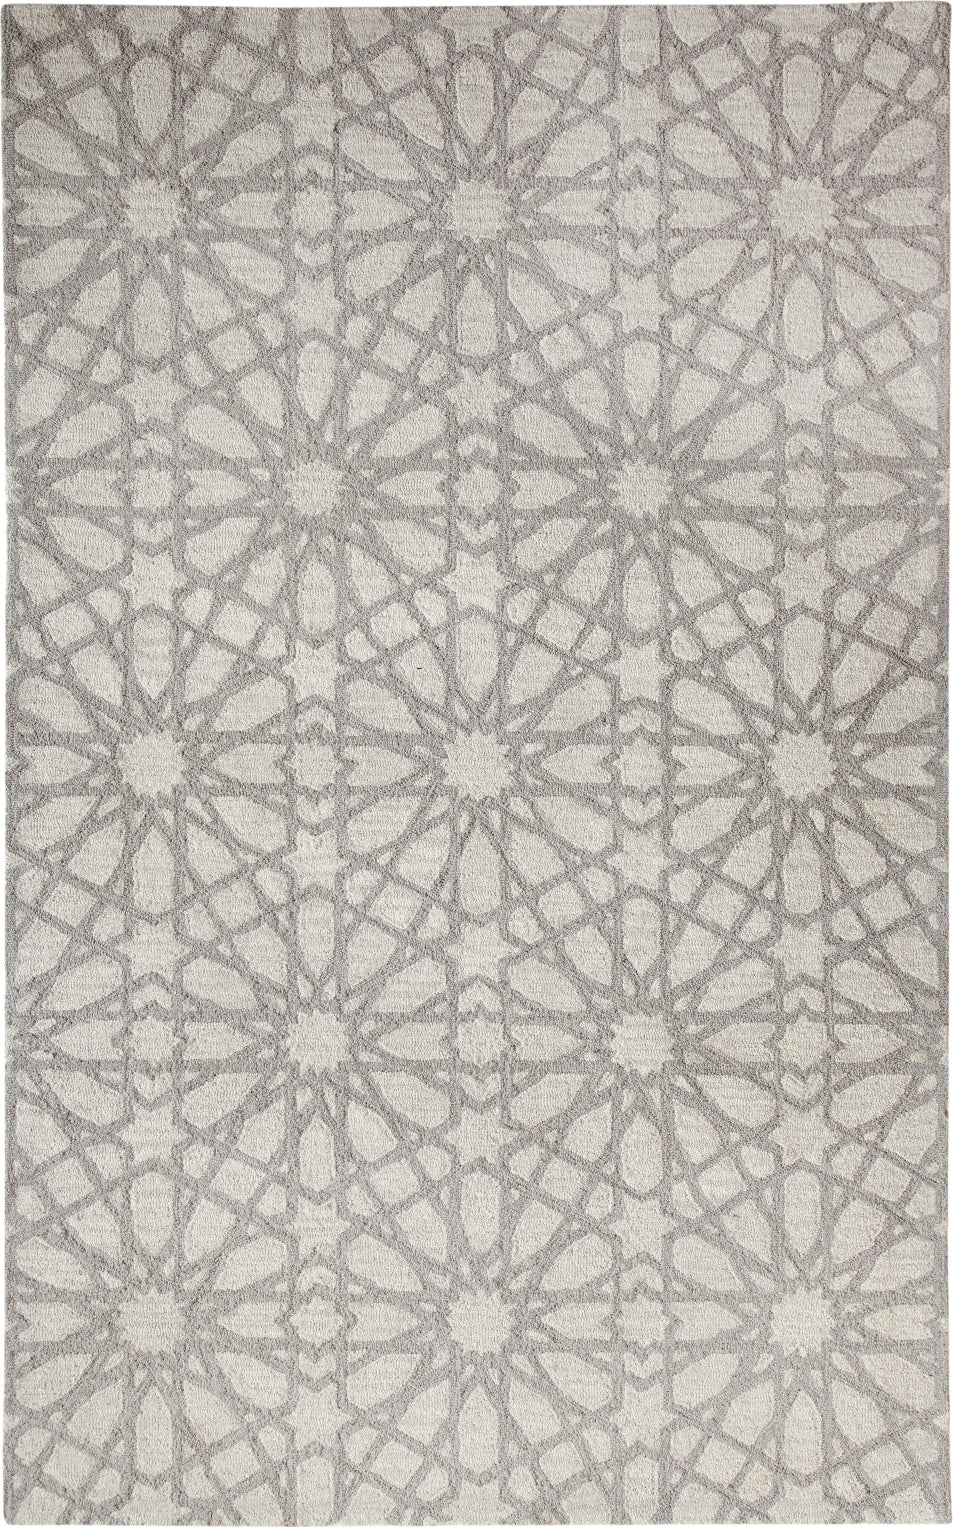 Dynamic Rugs Galleria 7862 Silver Area Rug main image